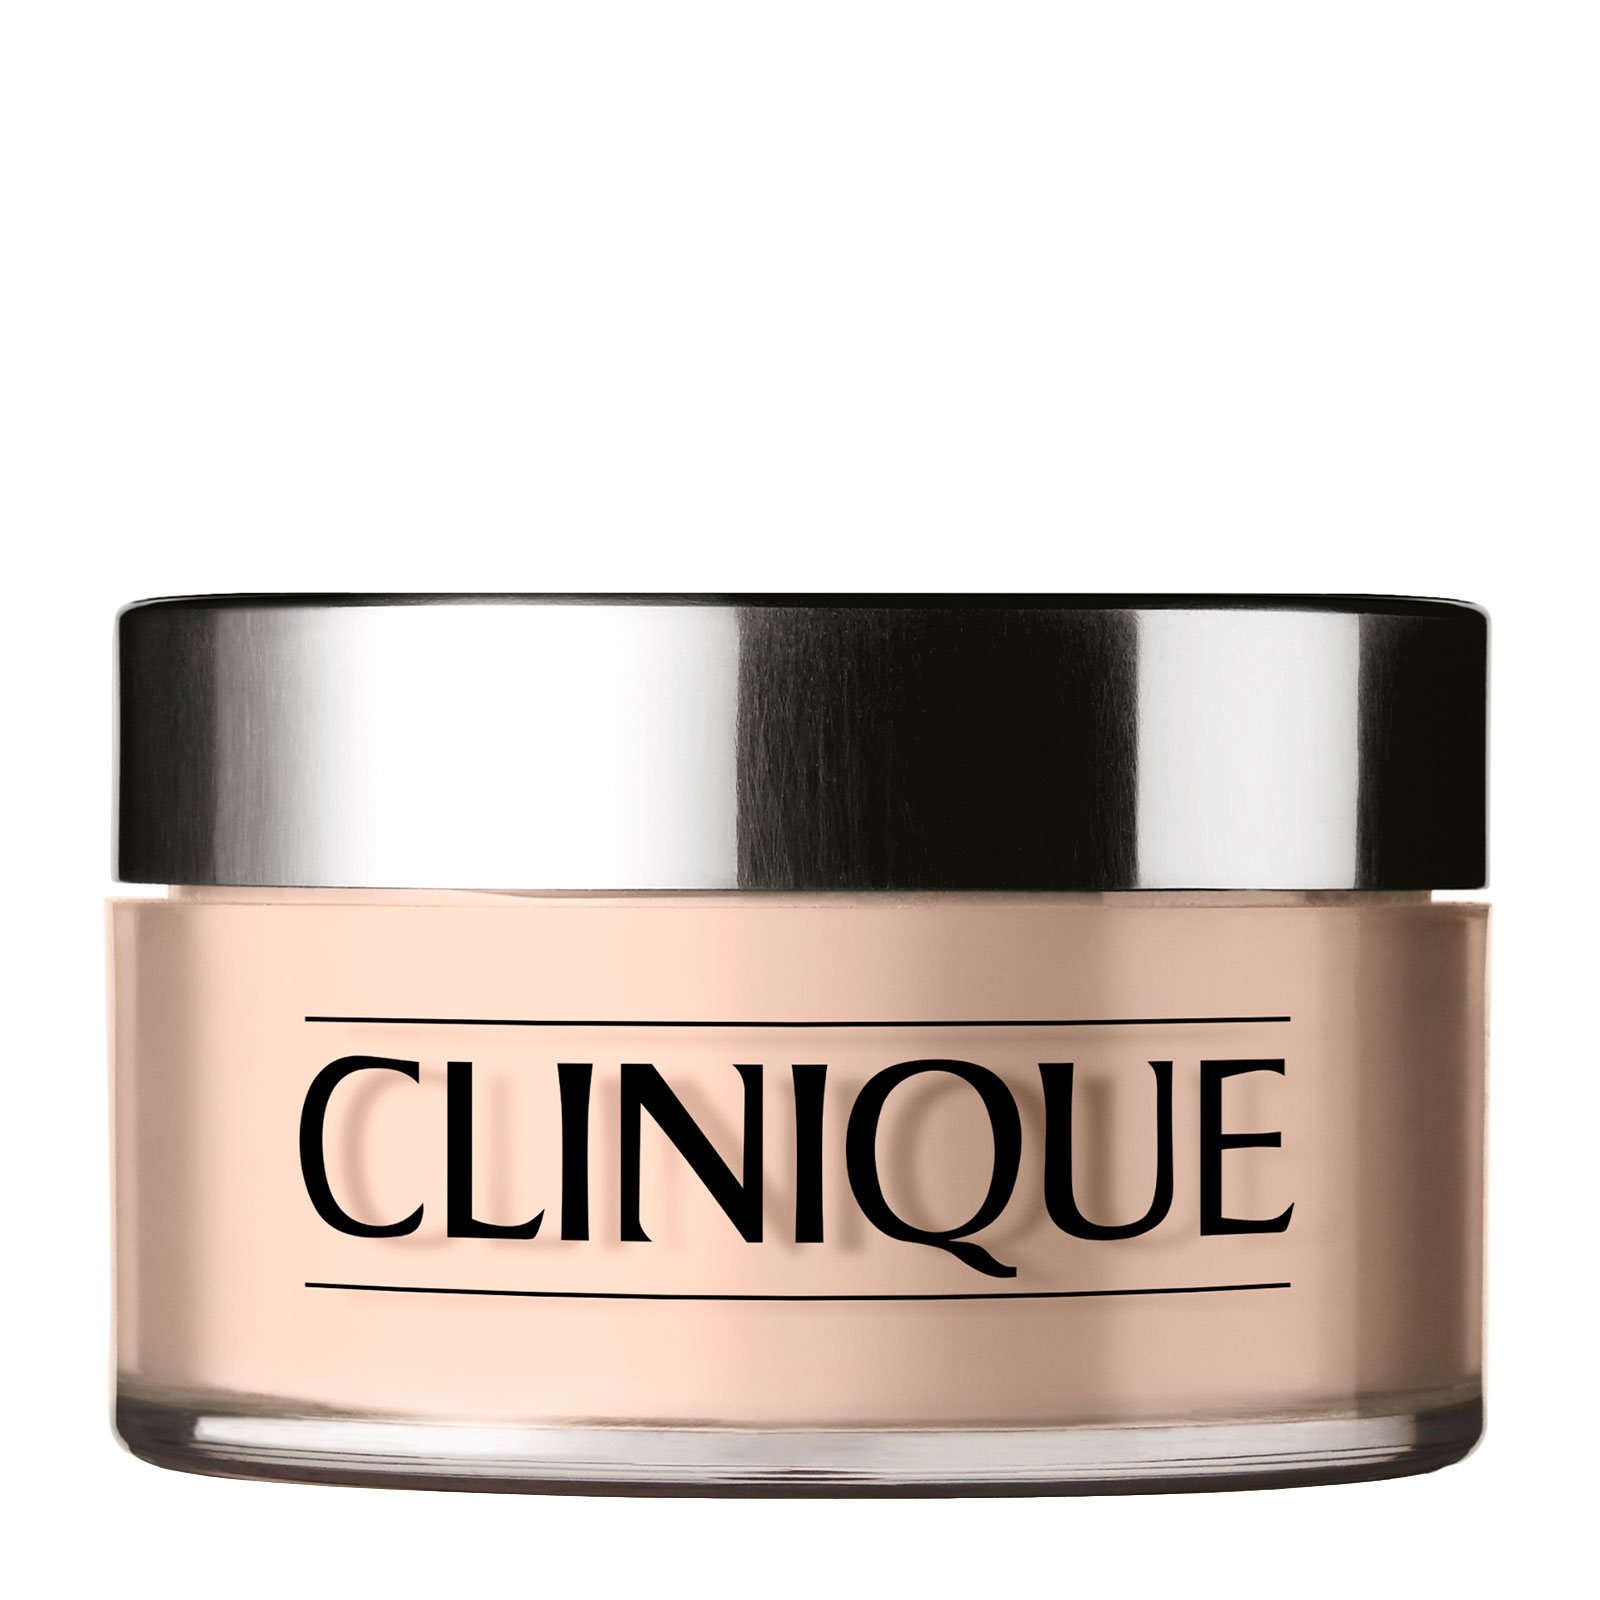 Clinique Blended Face Powder 25G Transparency 3